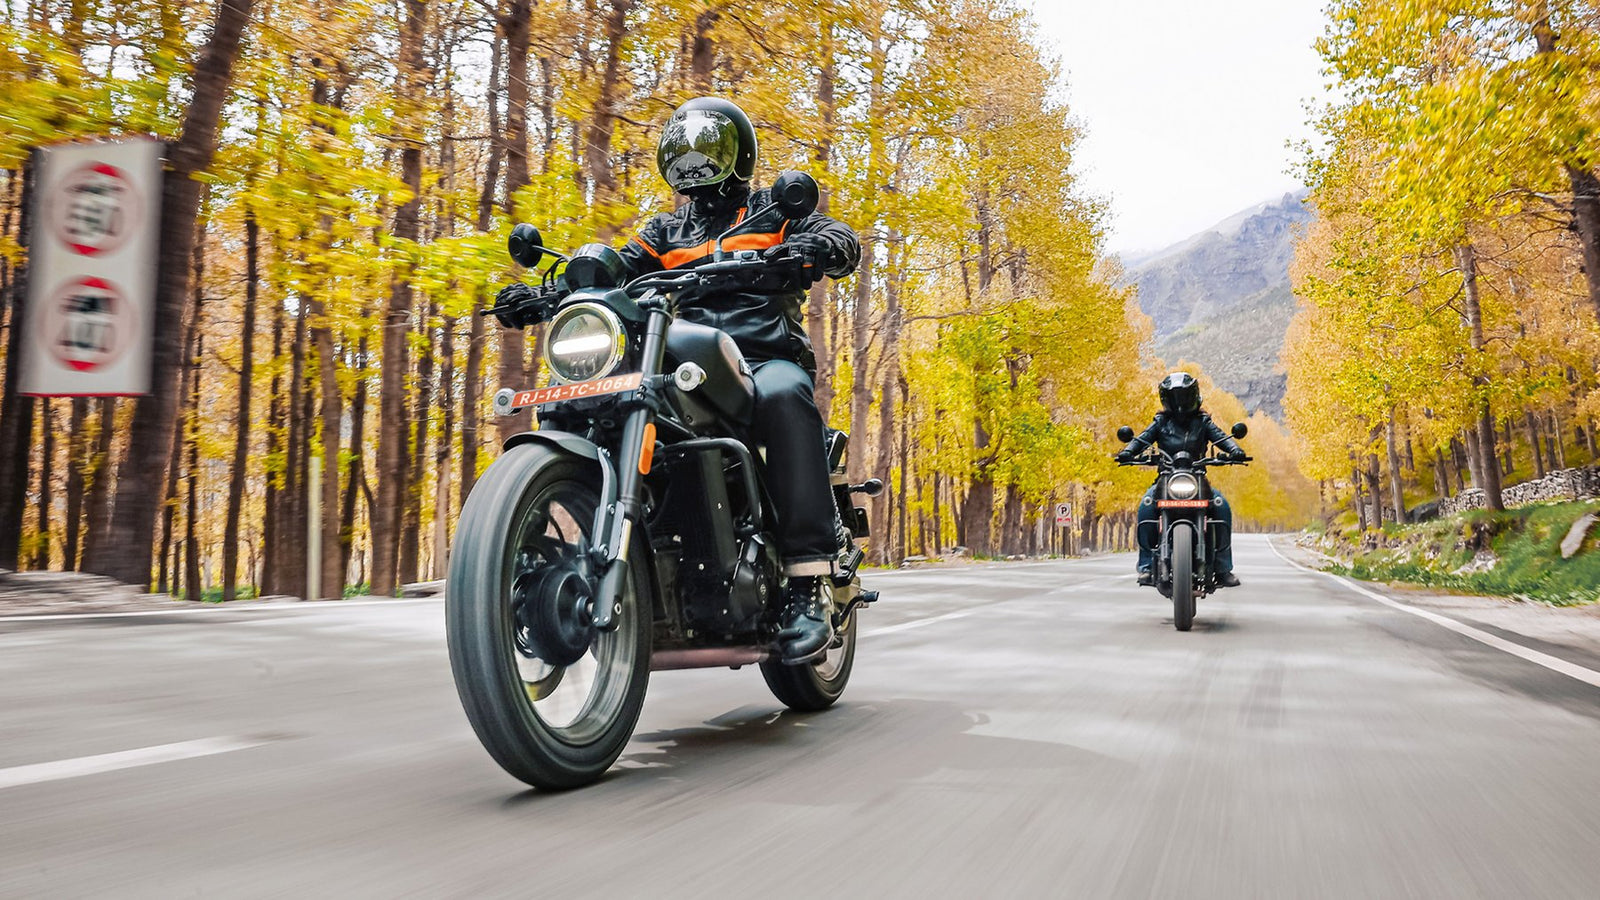 The Harley-Davidson X440: An Affordable Neo-Retro Roadster